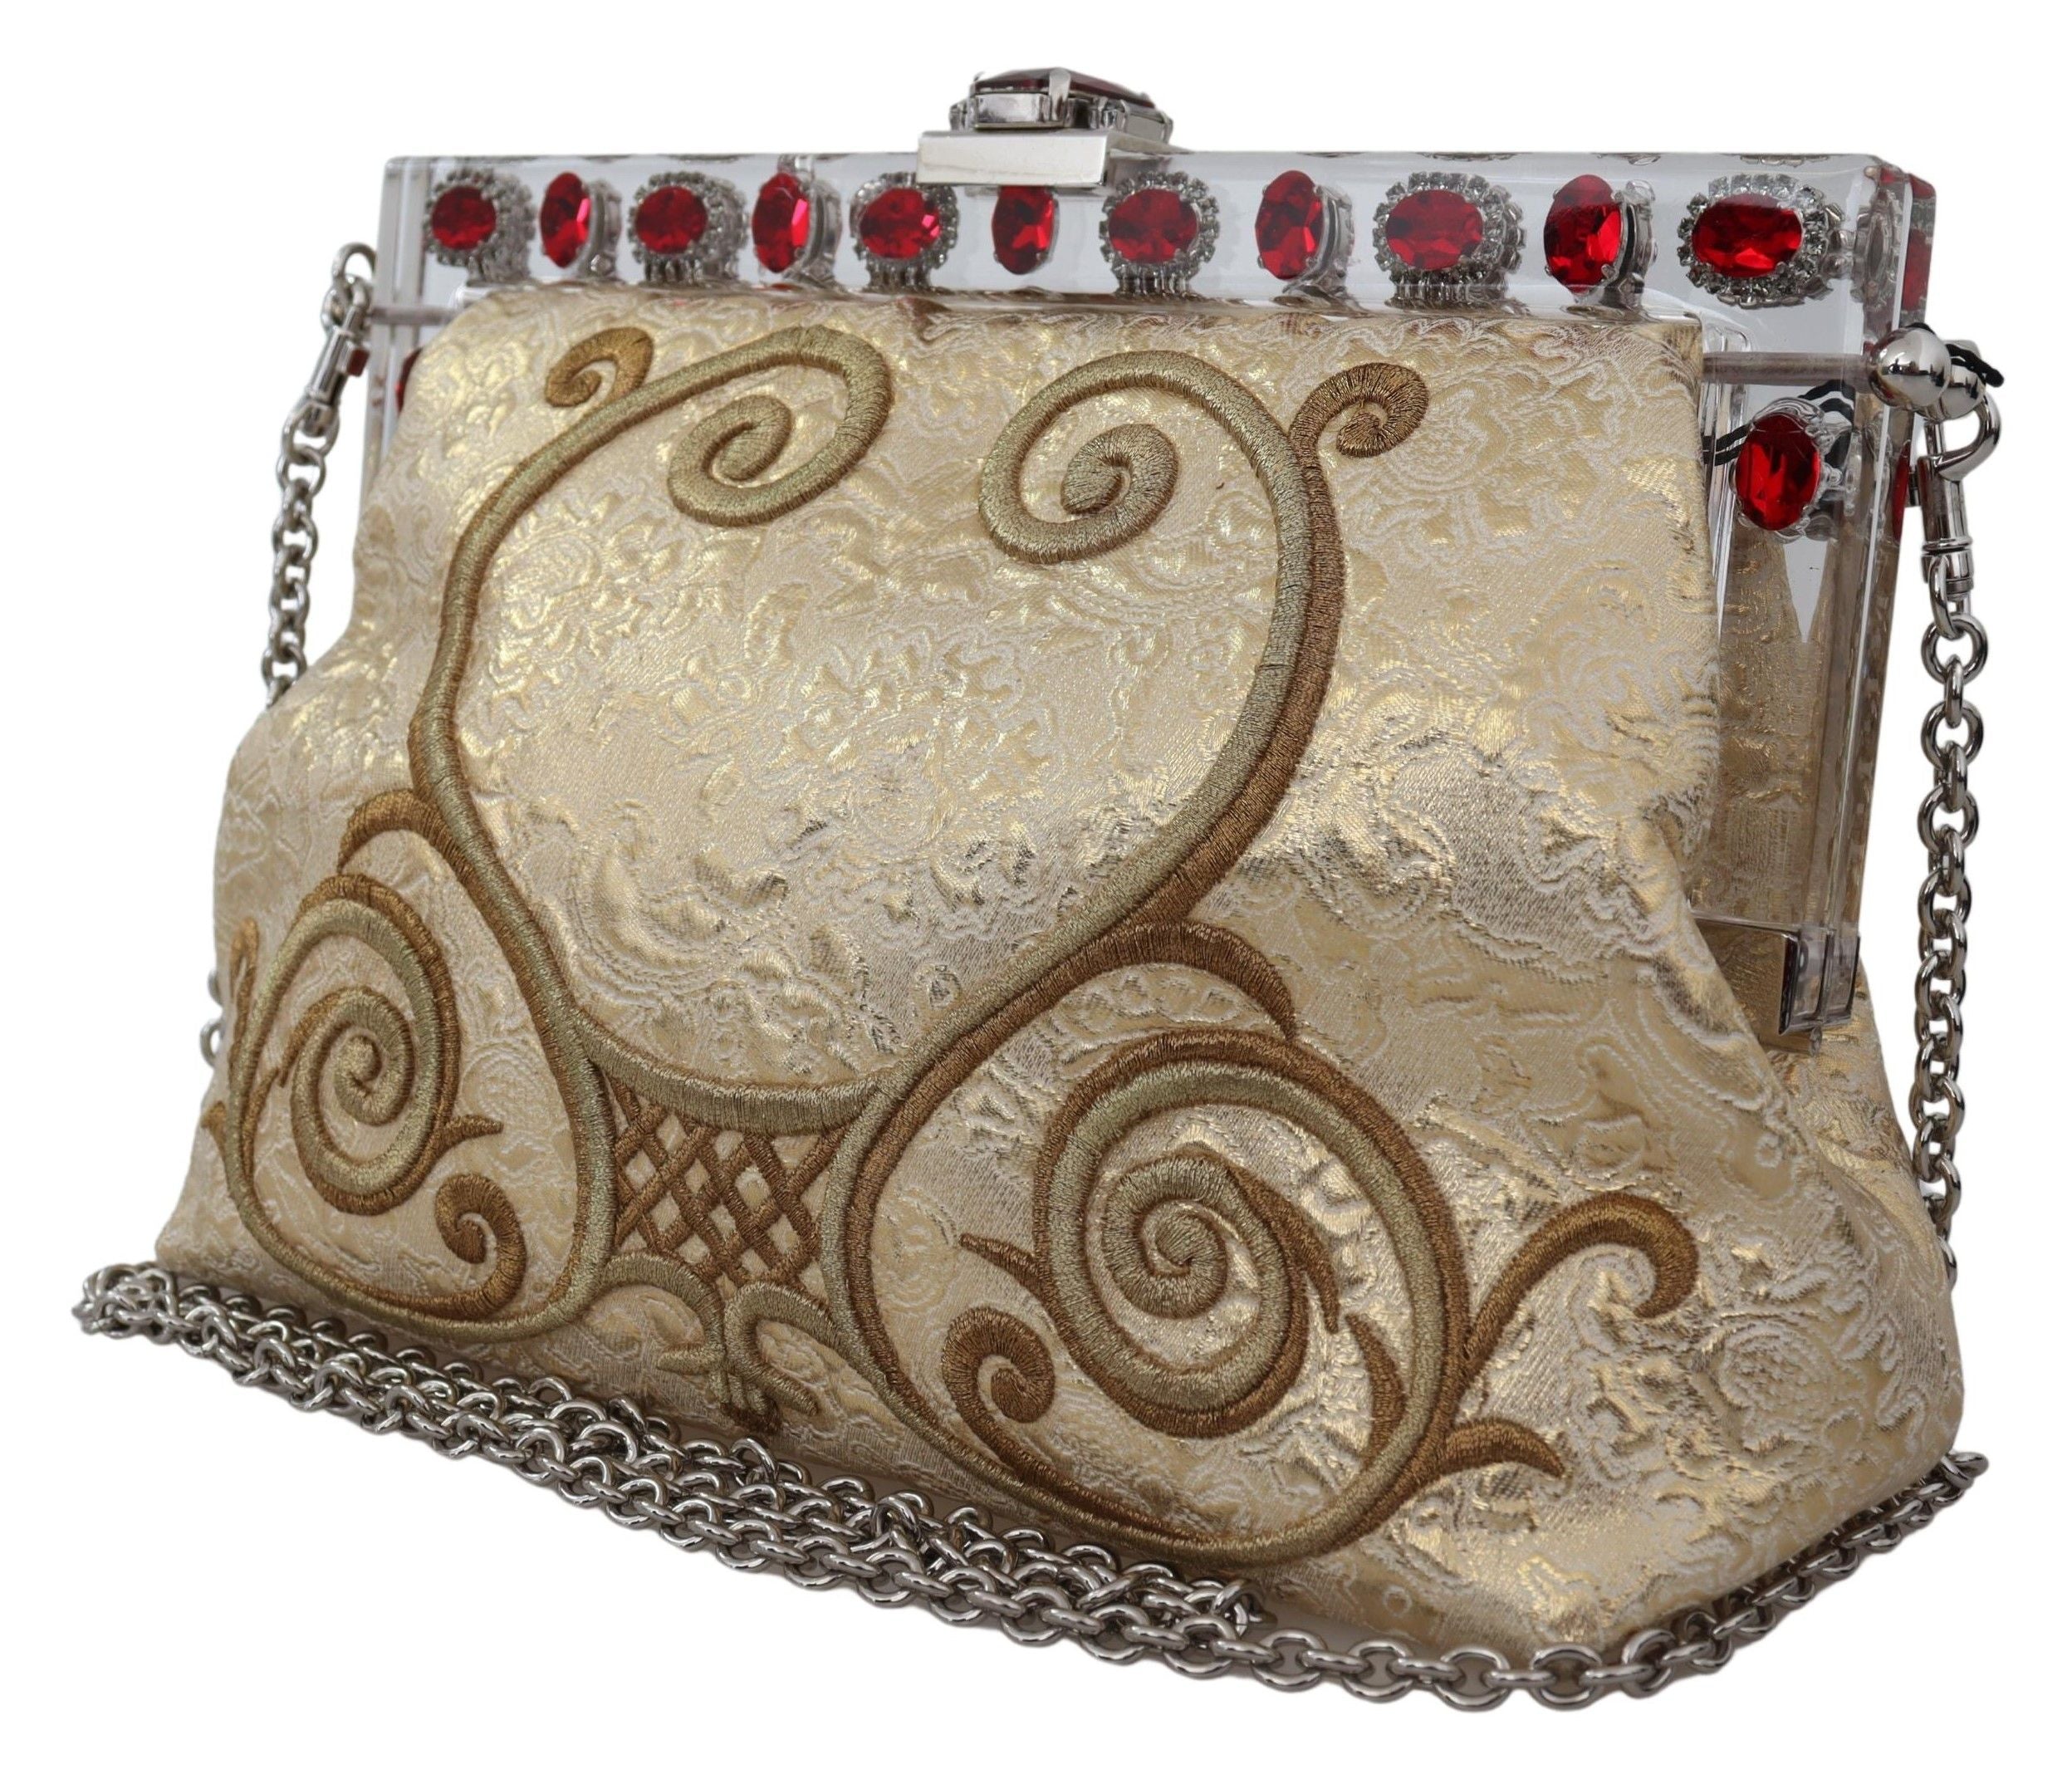 Dolce & Gabbana Glamorous Gold Evening Clutch with Crystal Details